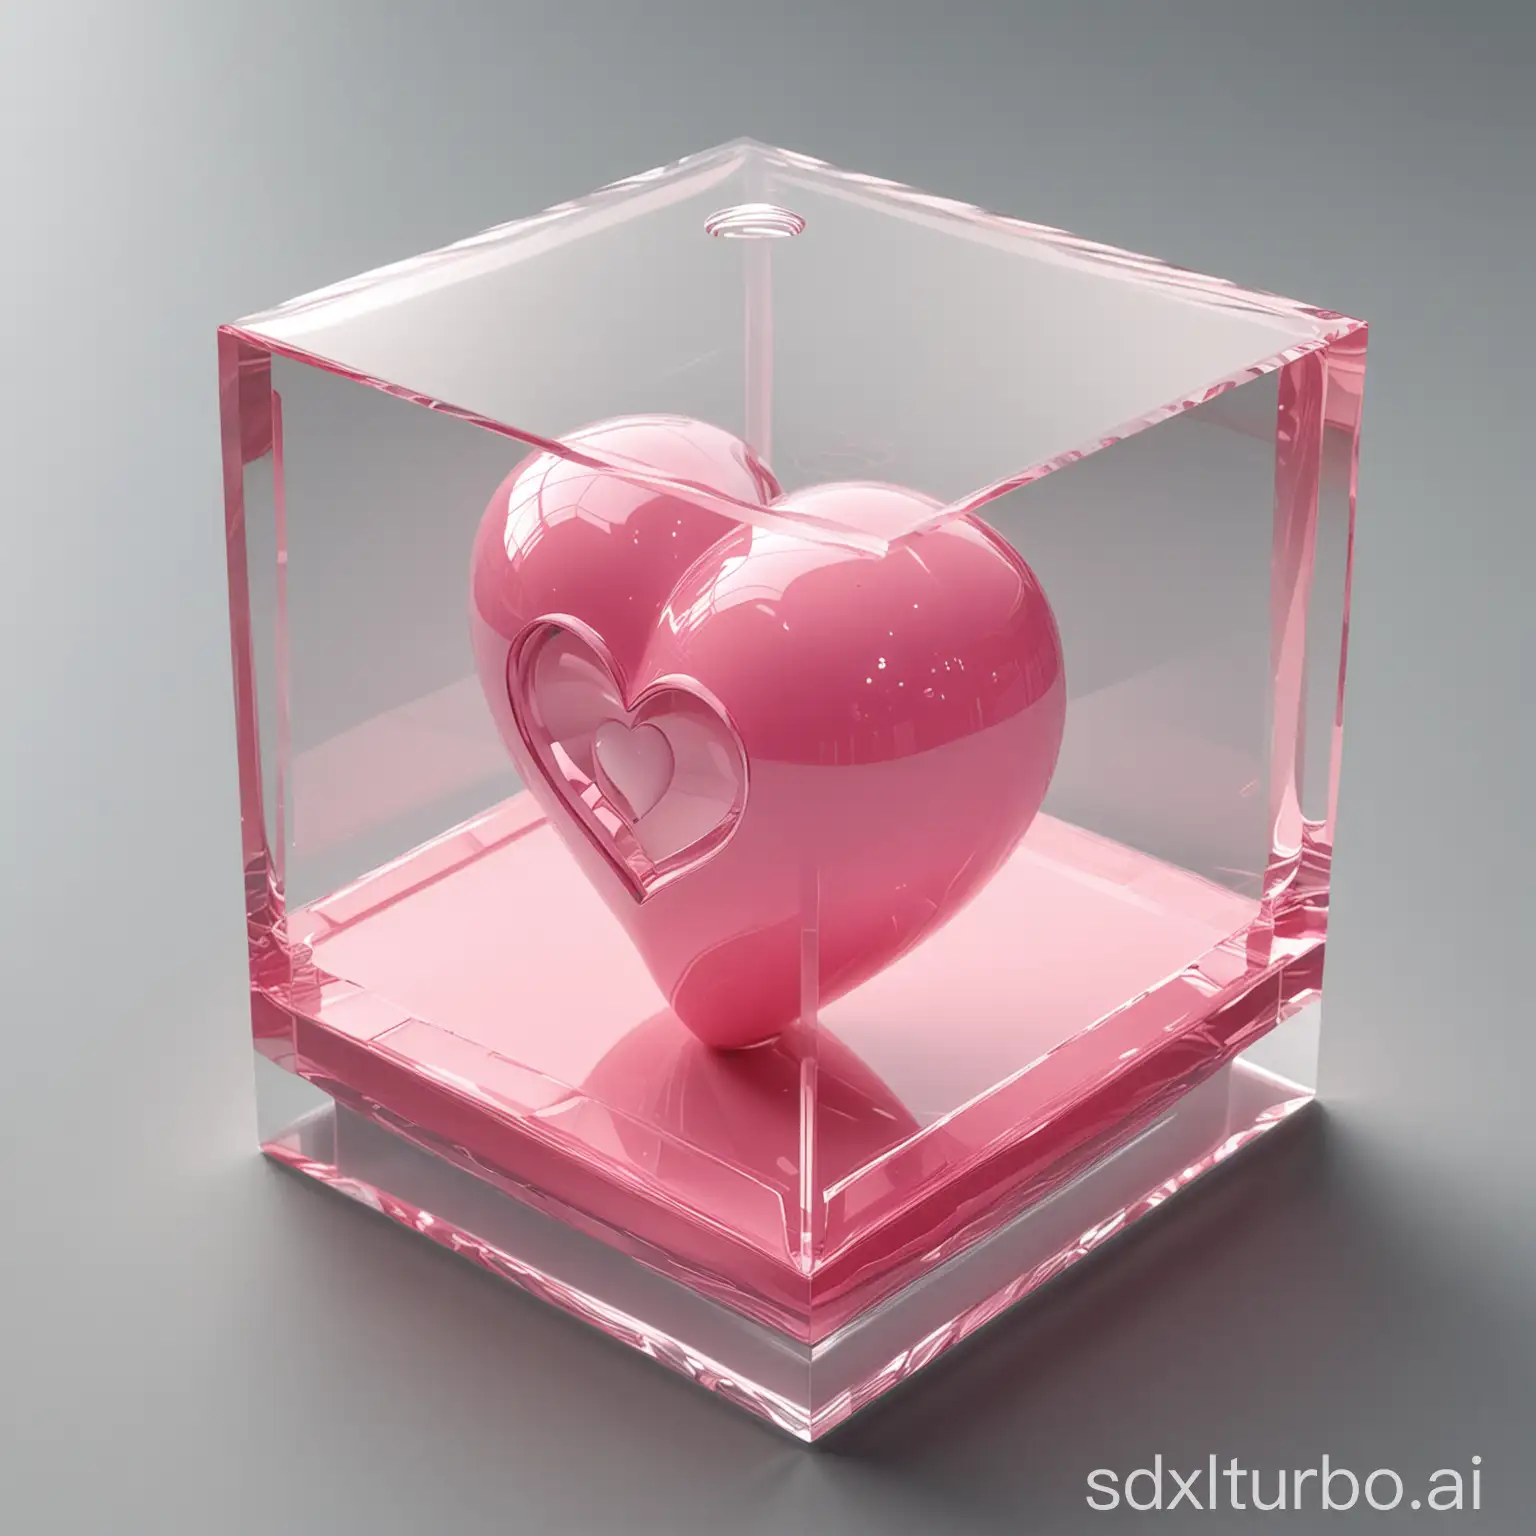 photorealistic image of a small[pink] 3D [heart] logo encased in aluxurious transparent box, viewed from anenhanced side angle to better reveal the 3D shapeof the logo. The box should be white, exquisitelydesigned, featuring crystal-clear glass withrefined, sharp edges and polished surfaces thatemphasize the depth and three-dimensionality otthe logo inside